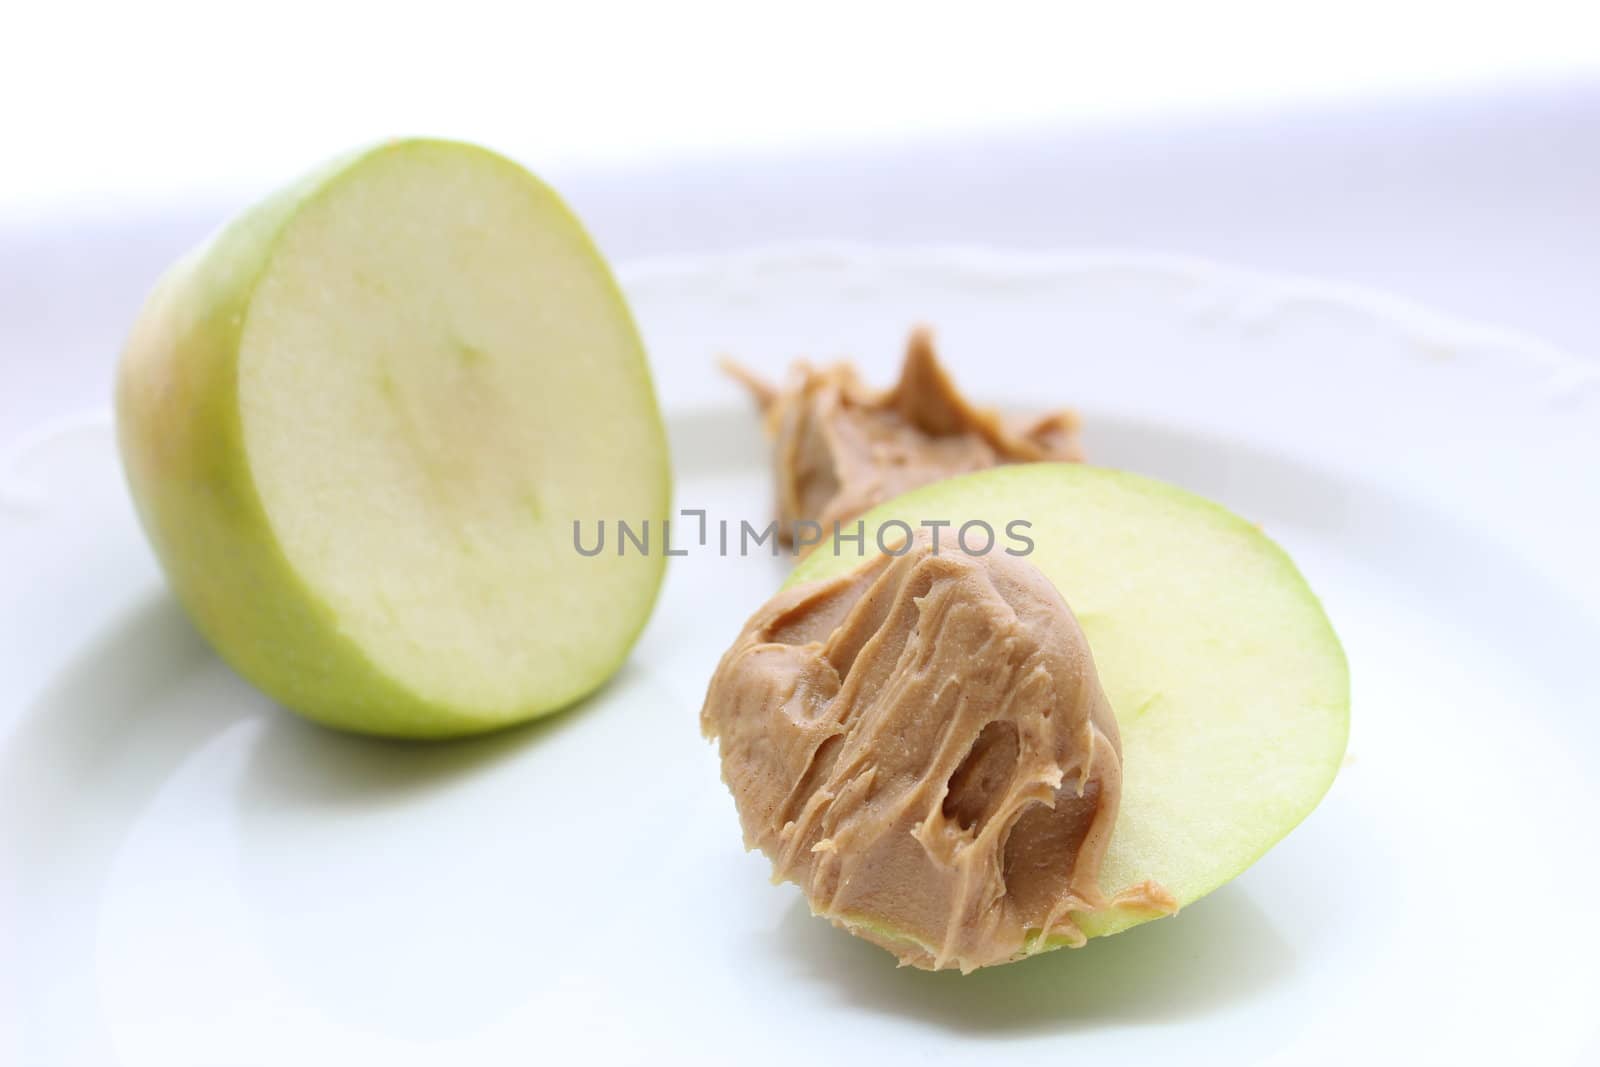 Sliced off green apple with peanut butter.